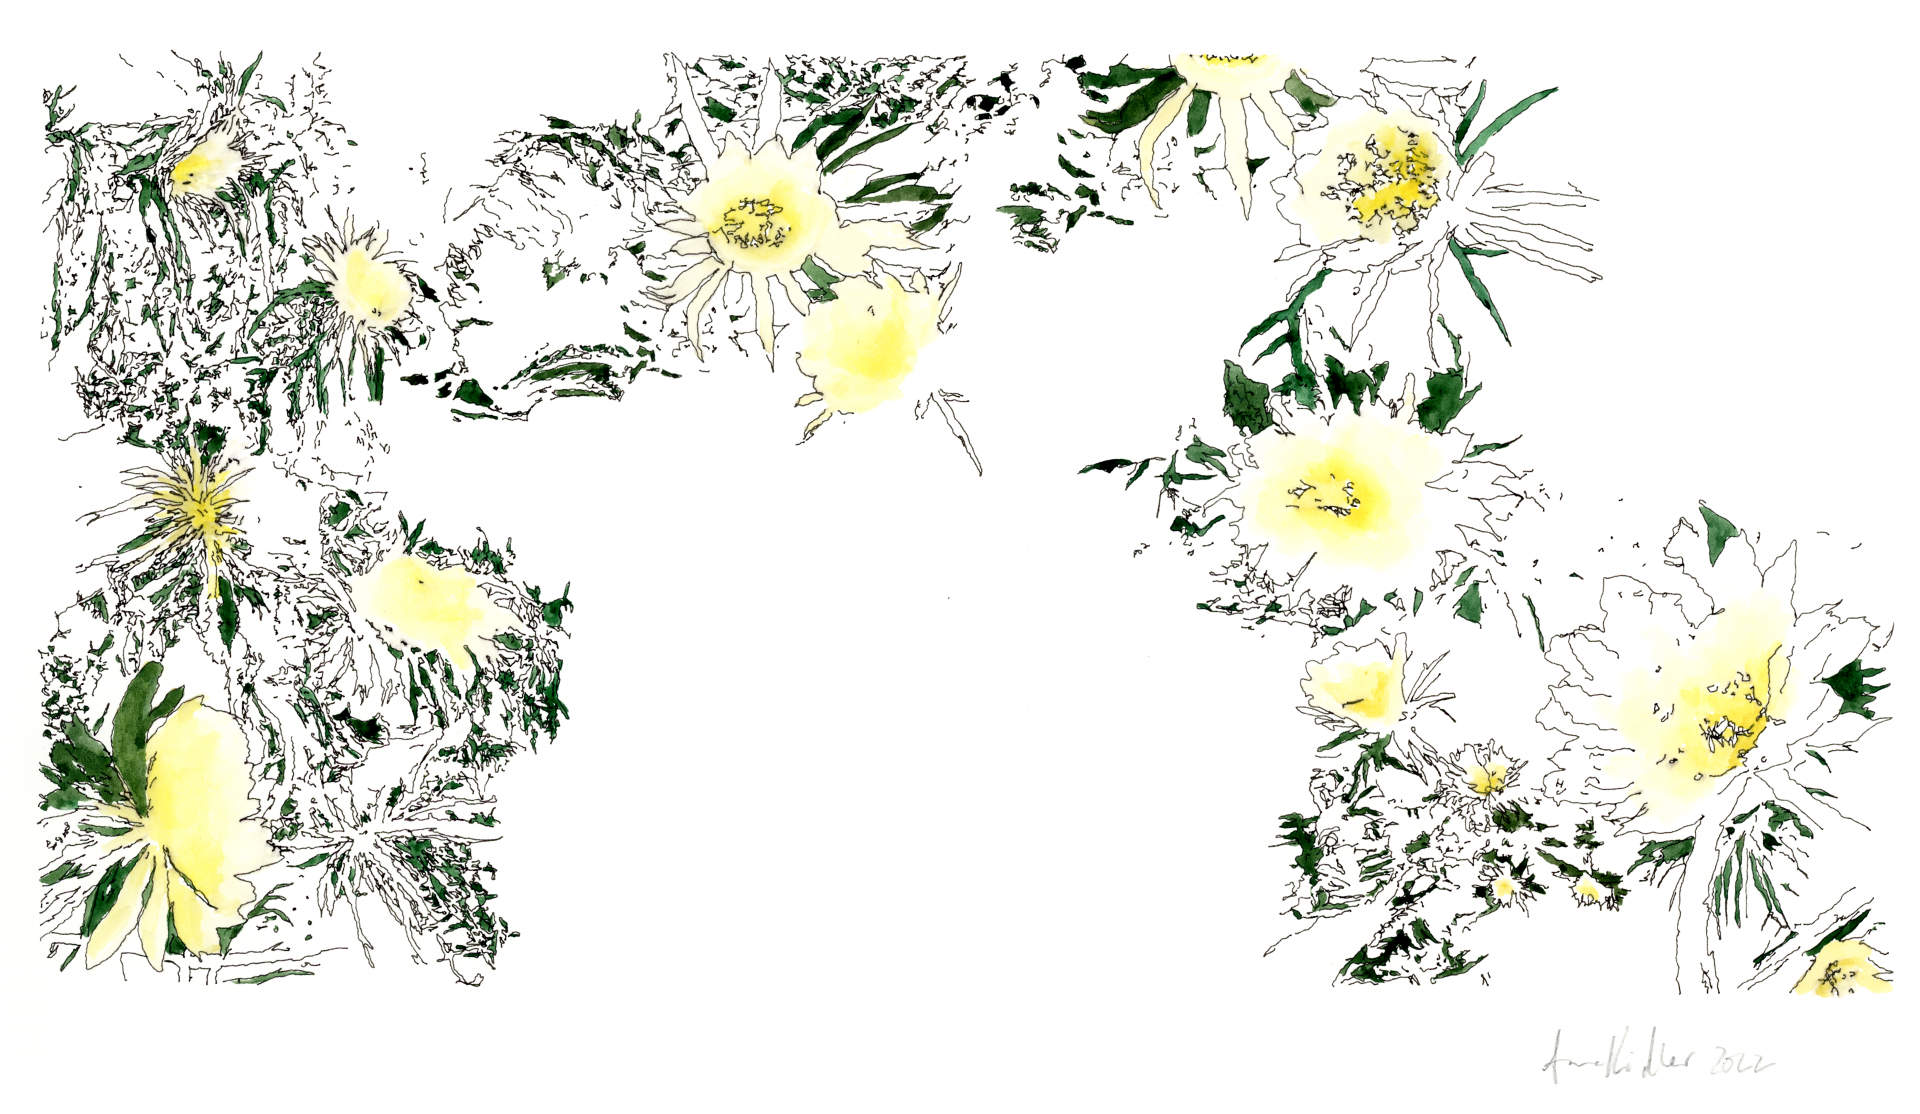 A digital drawing of lightly-drawn flowers in an arc with touches of green and yellow